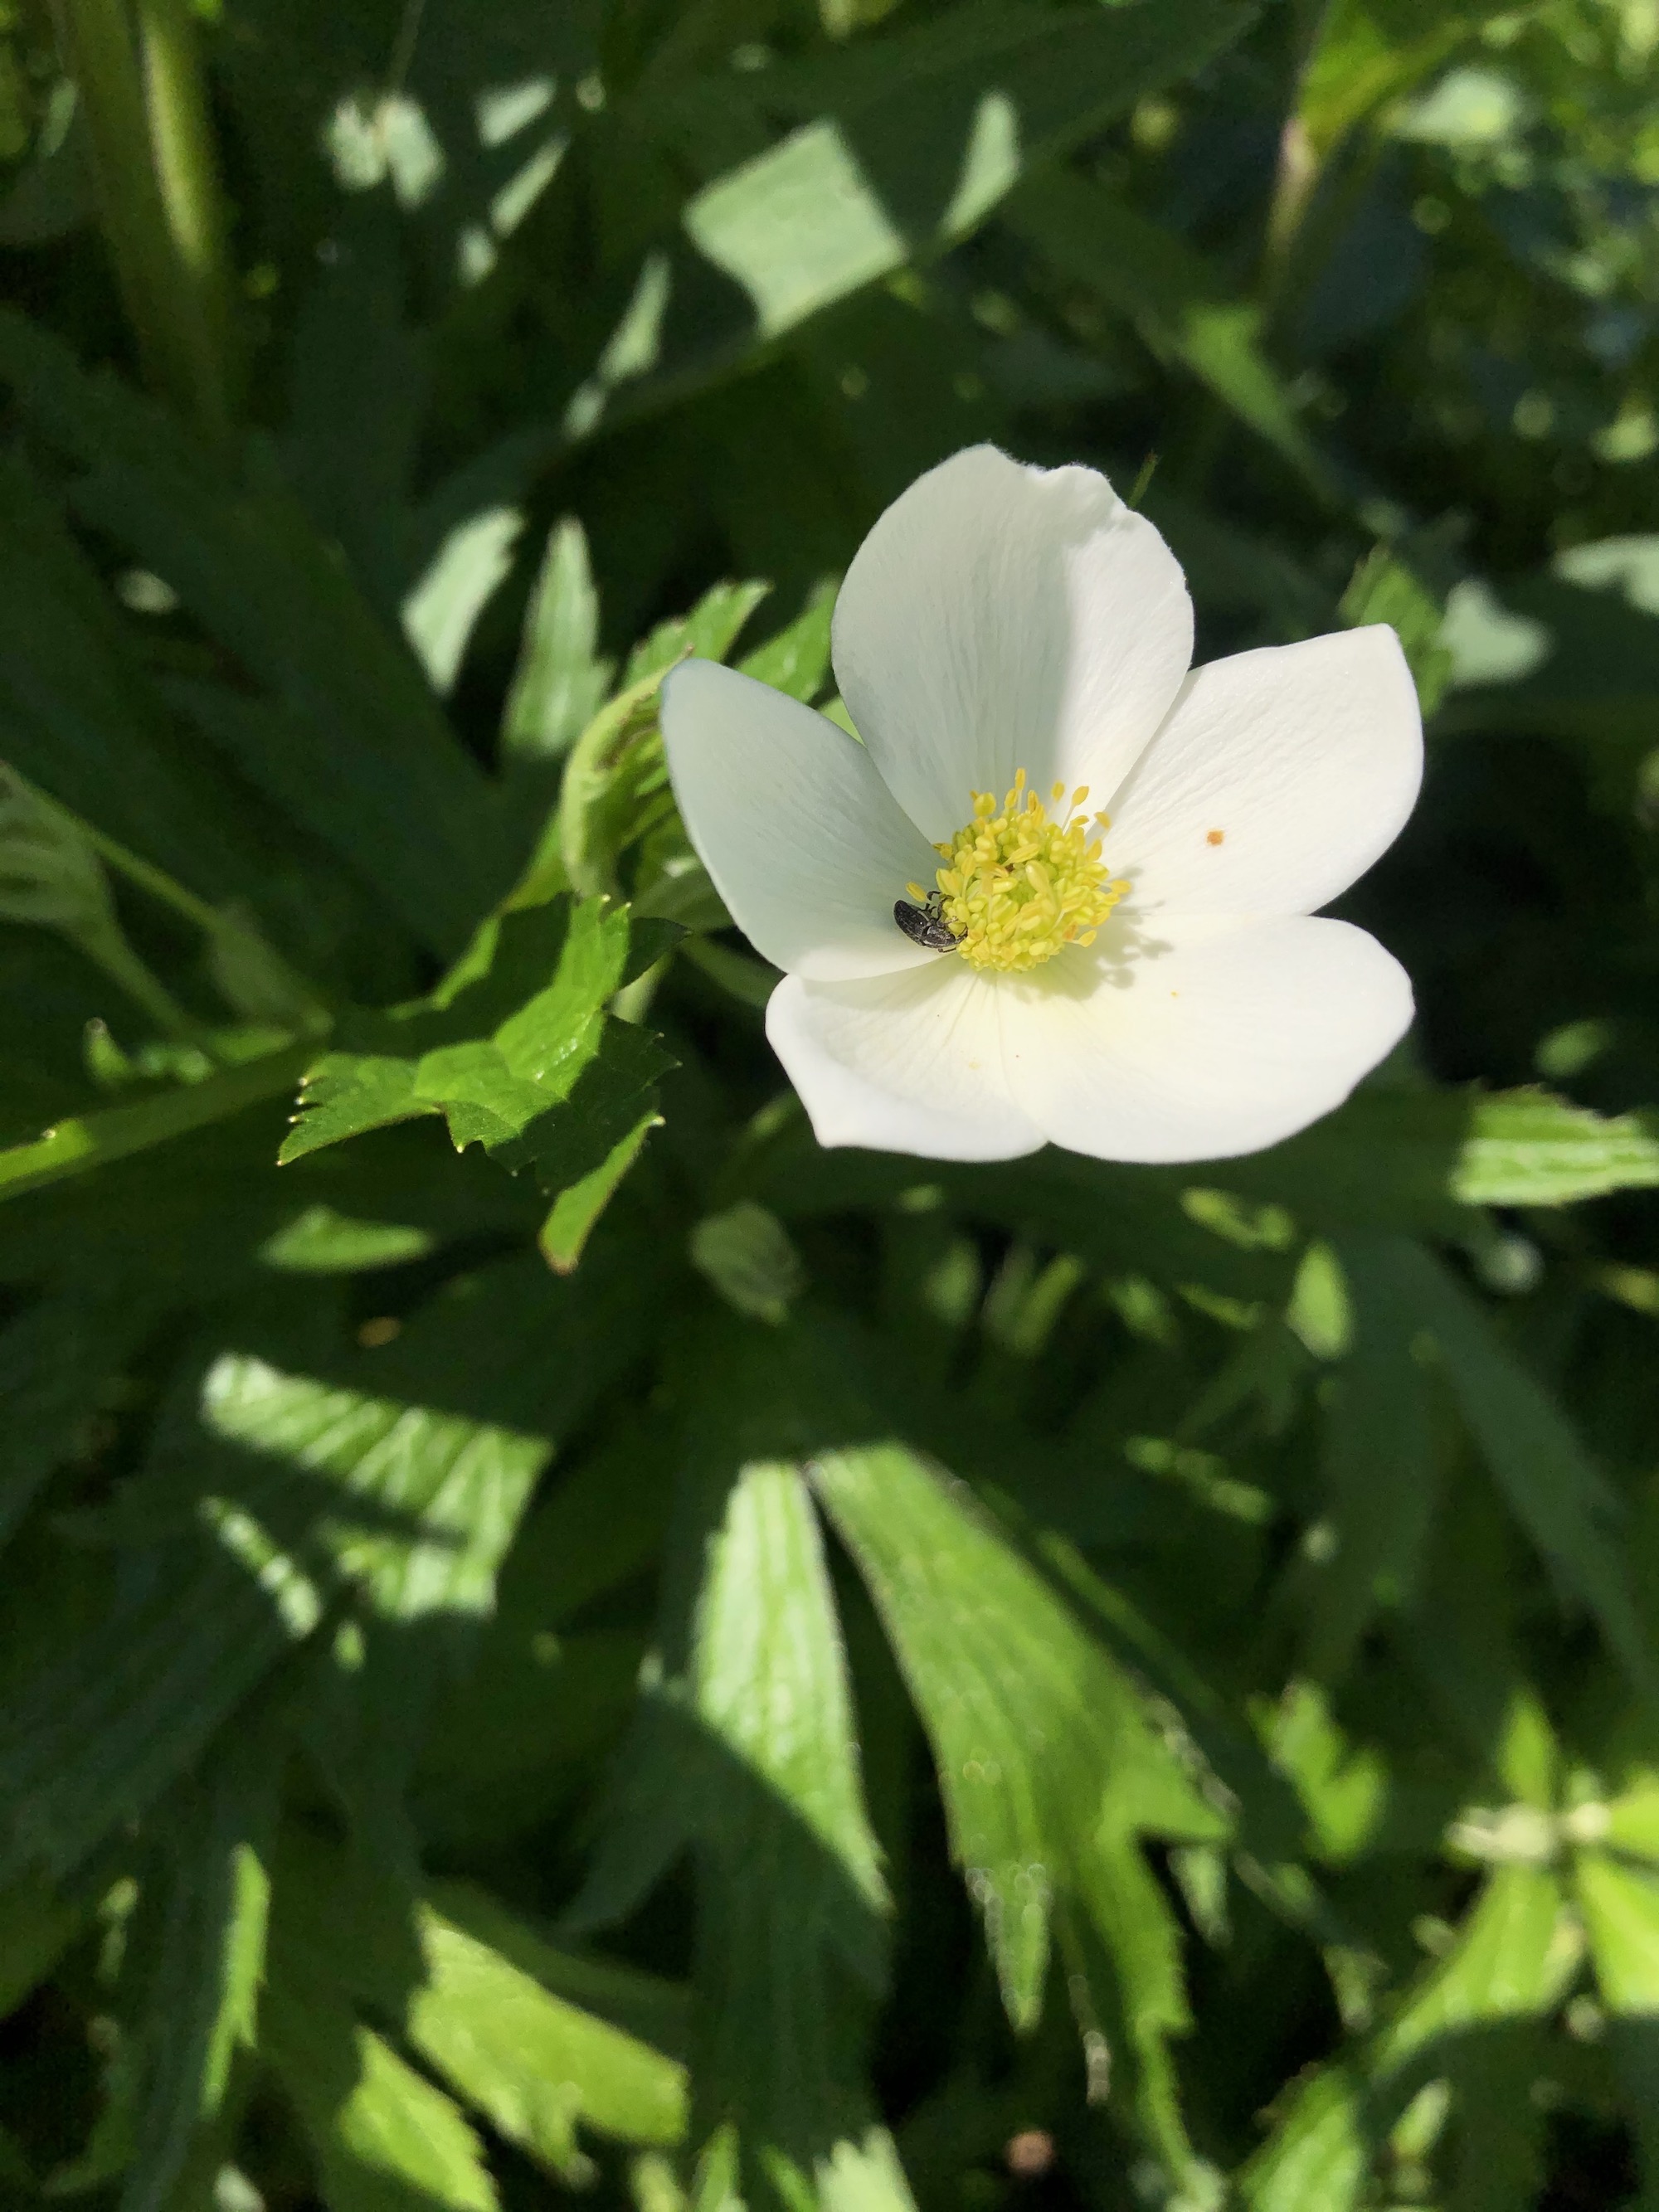 Canada anemone in UW Arboretum near Visitor Center in Madison, Wisconsin on May 22, 2021.